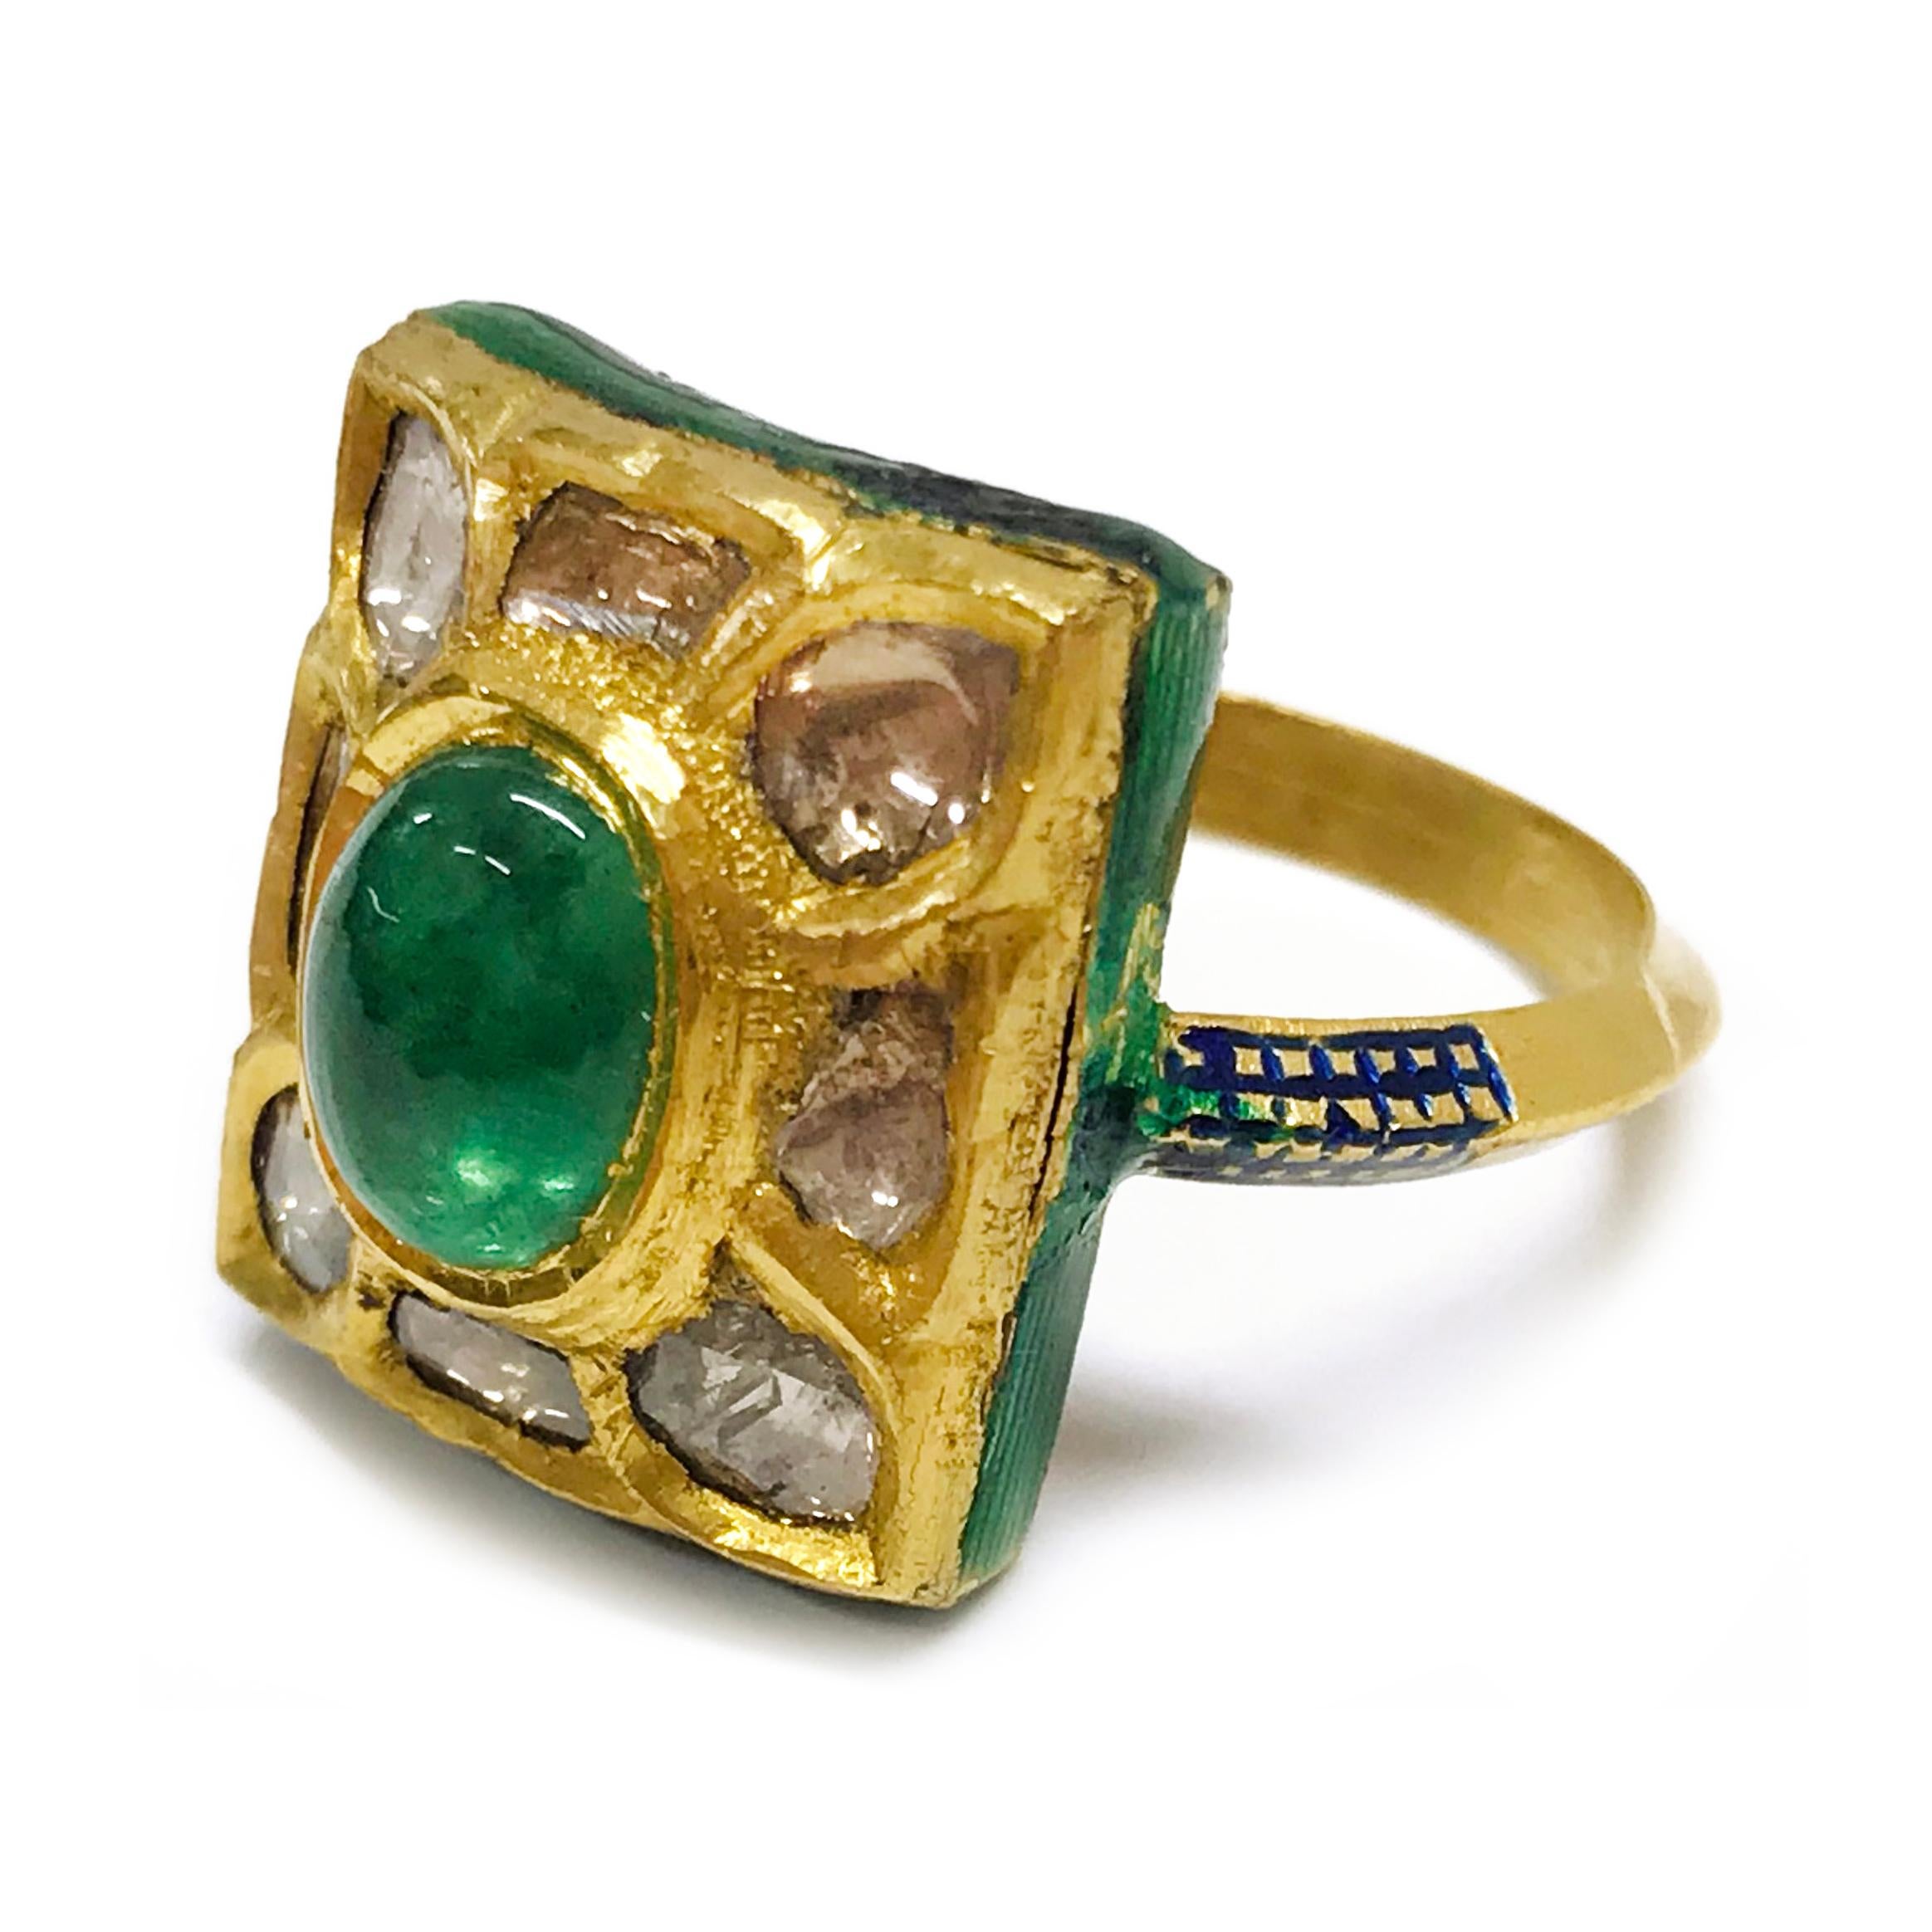 24 Karat Diamond Emerald Enamel Ring. This unique Kundan ring features an oval emerald cabochon at the center with eight Indian-cut/Polki diamonds and enamel accents. There are enamel accents of green and blue on the sides and on the top of the